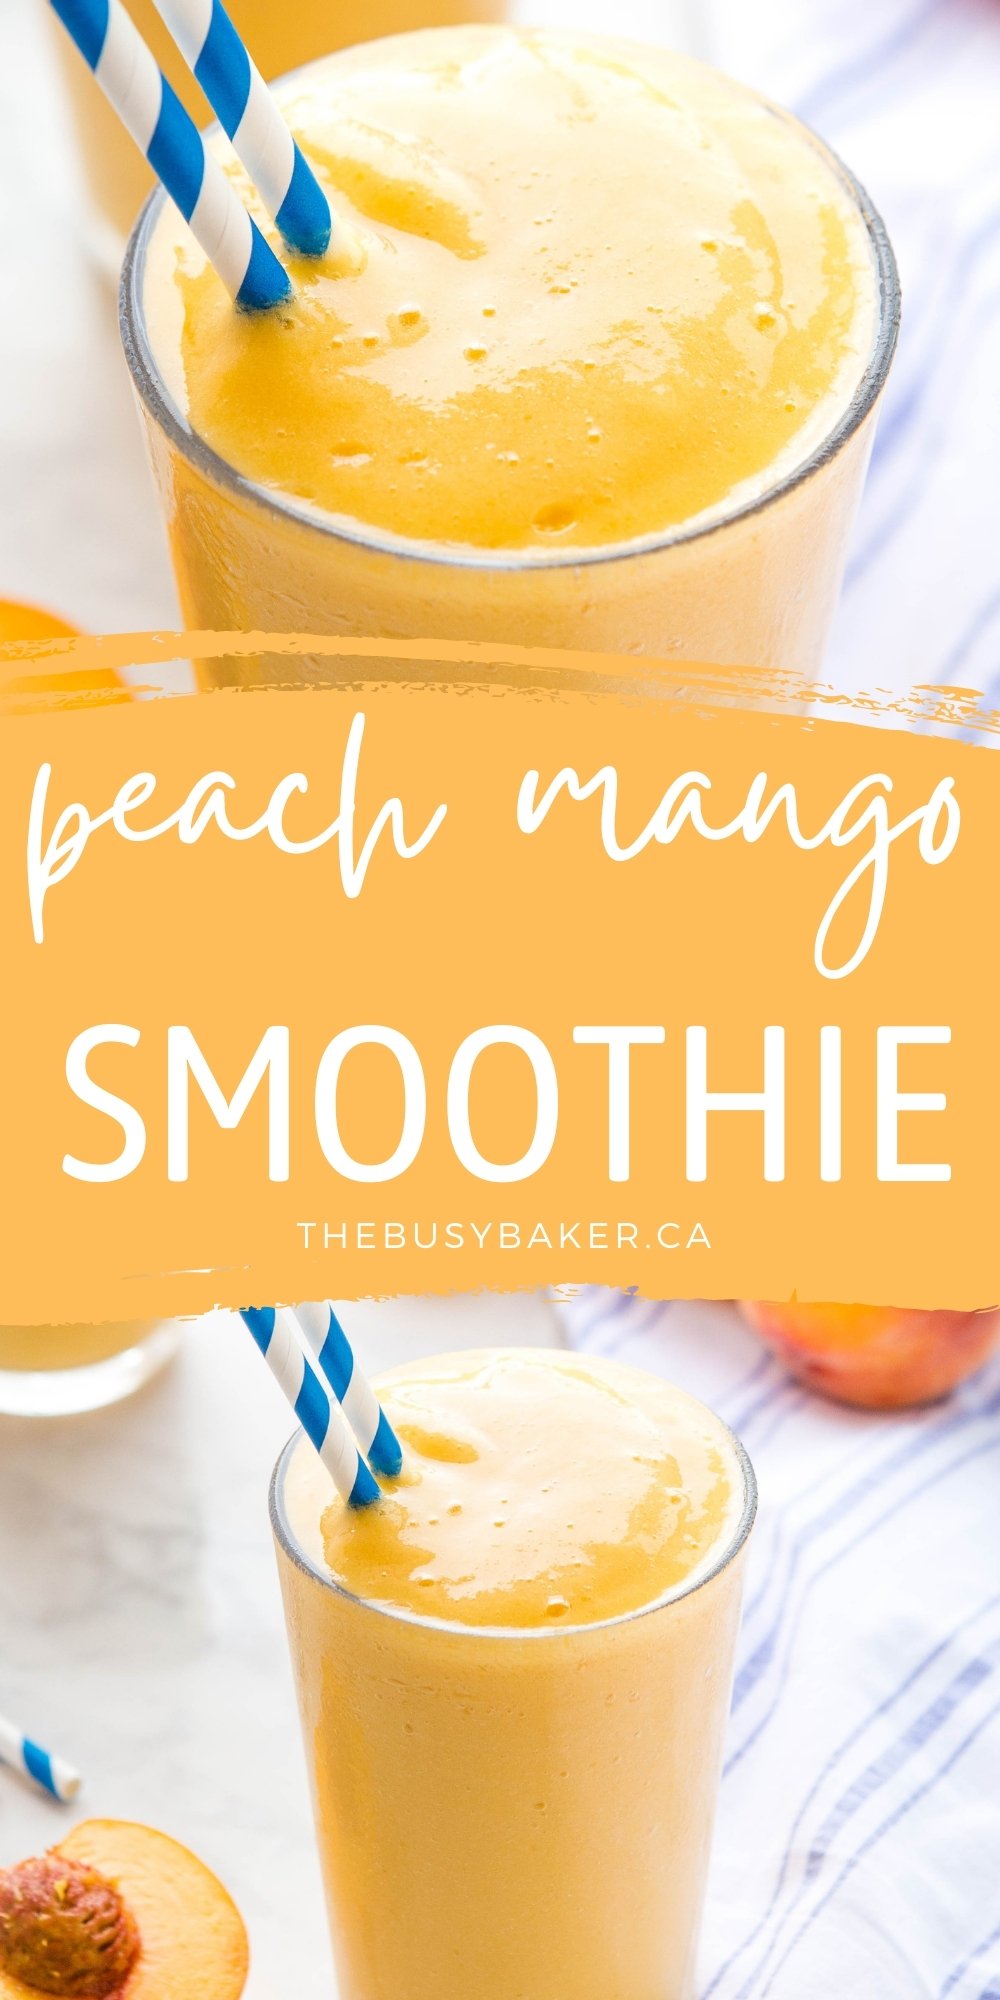 This Peach Mango Smoothie is creamy and delicious, packed with peaches, mango, and bananas - nutritious, dairy-free, and easy to make! Perfect for breakfast or a snack! Recipe from thebusybaker.ca! #smoothie #peachmango #fruit #wholefoods #breakfast #snack #postworkout #healthy #vegan #dairyfree #vegetarian #plantbased #health via @busybakerblog